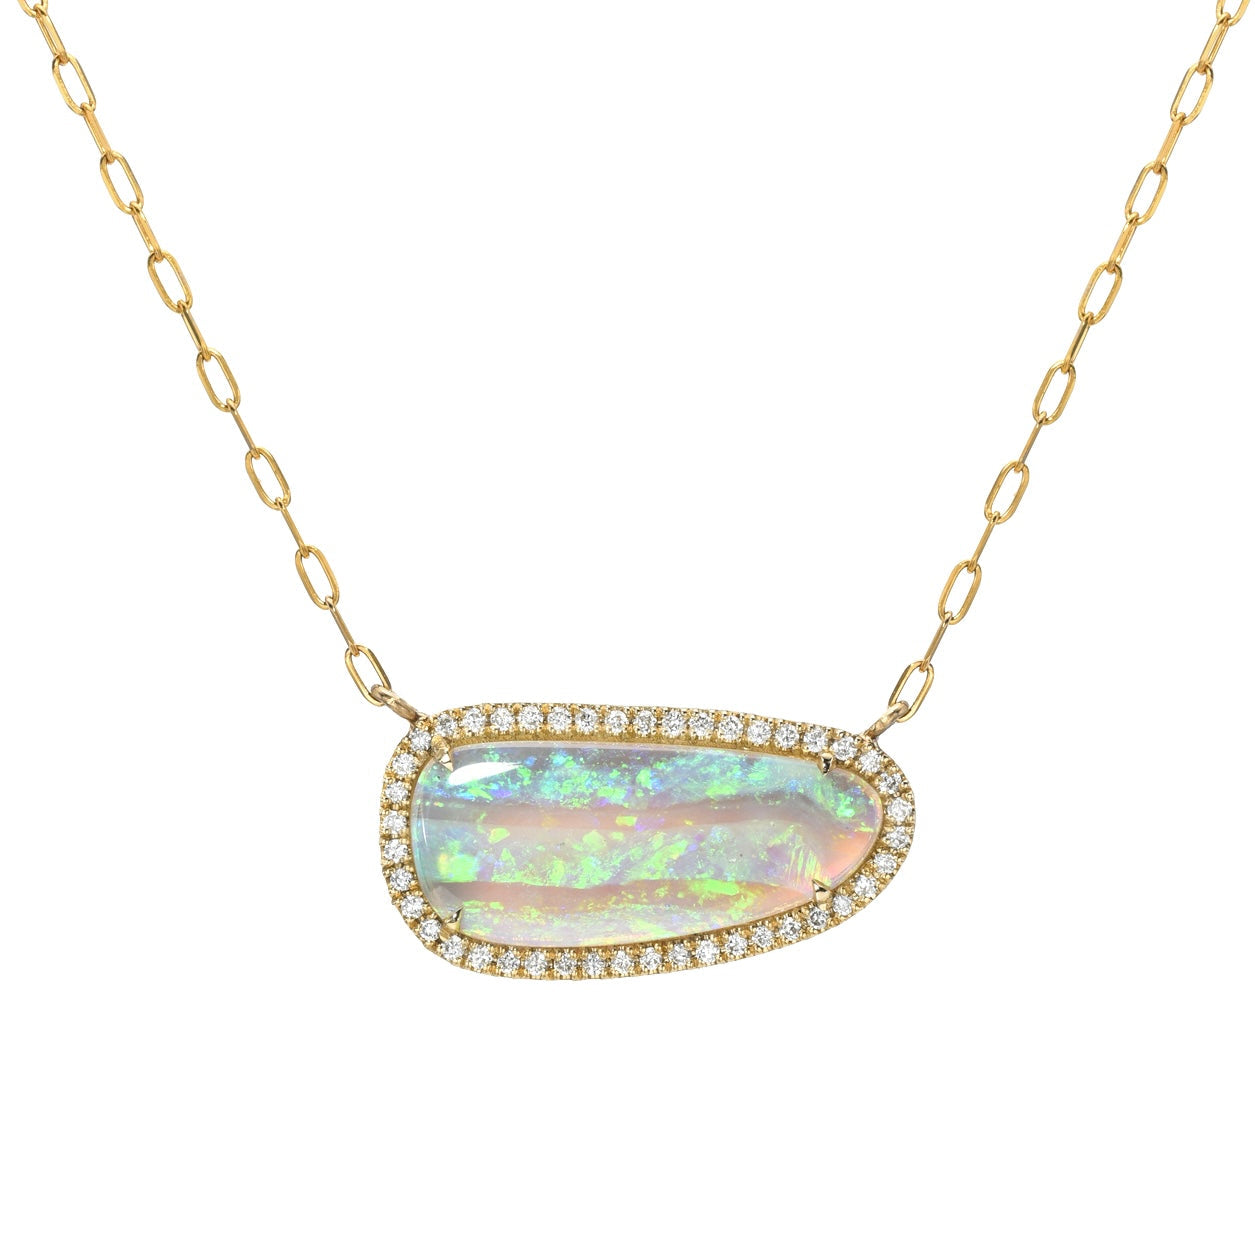 An Australian Opal Necklace by NIXIN Jewelry with an opal and diamonds set in 14k gold. A gold opal necklace.